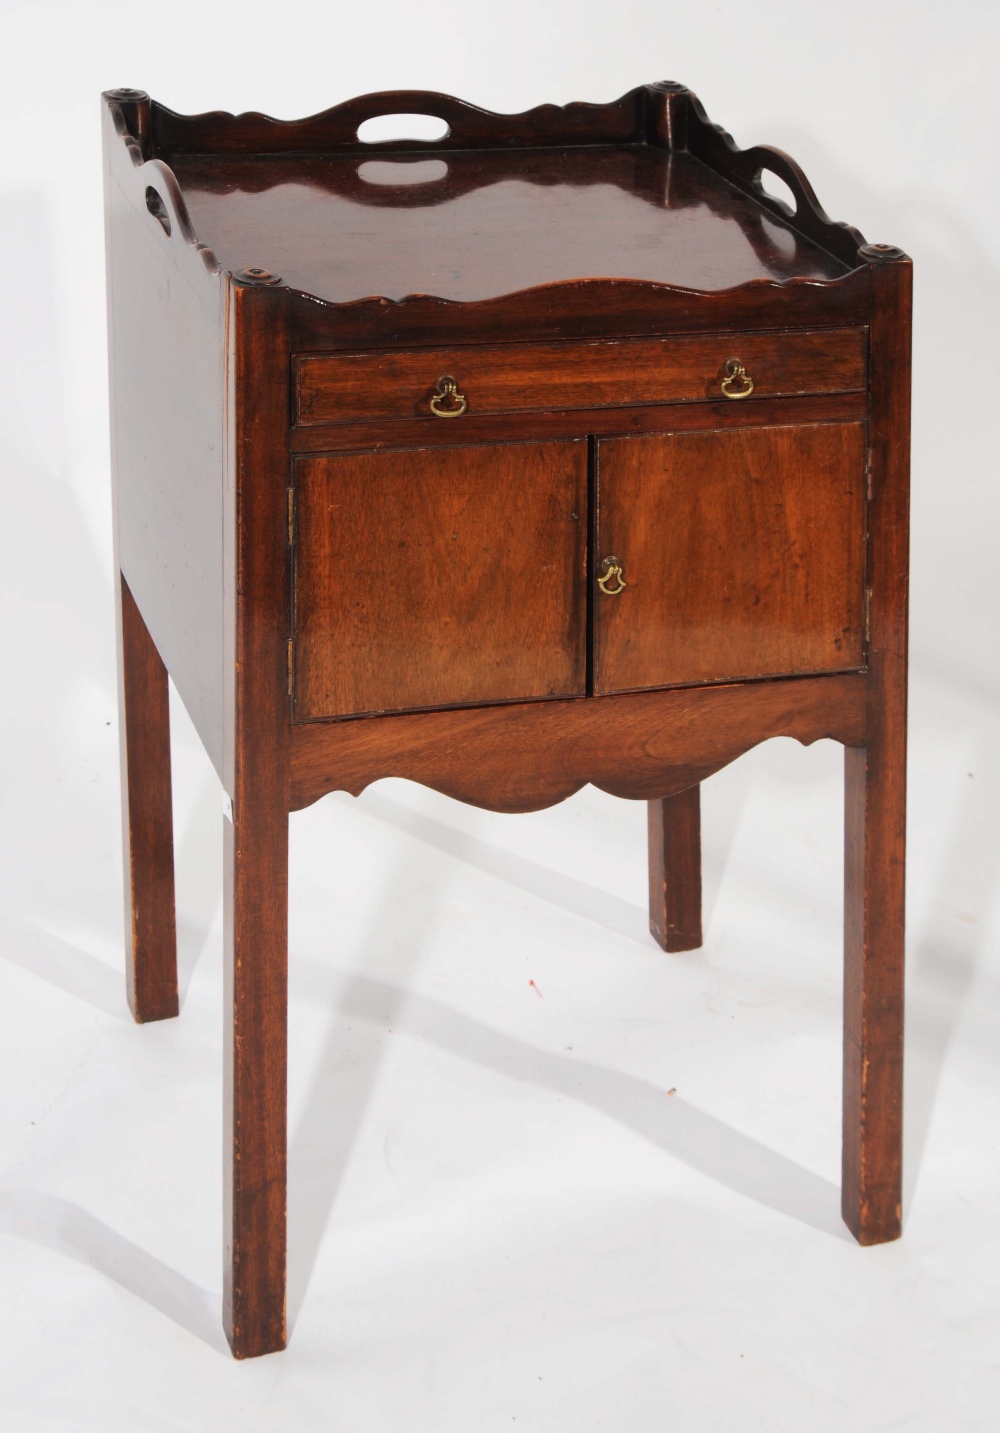 A GEORGIAN MAHOGANY TRAY TOPPED BEDSIDE COMMODE with pierced handles over a single drawer and two